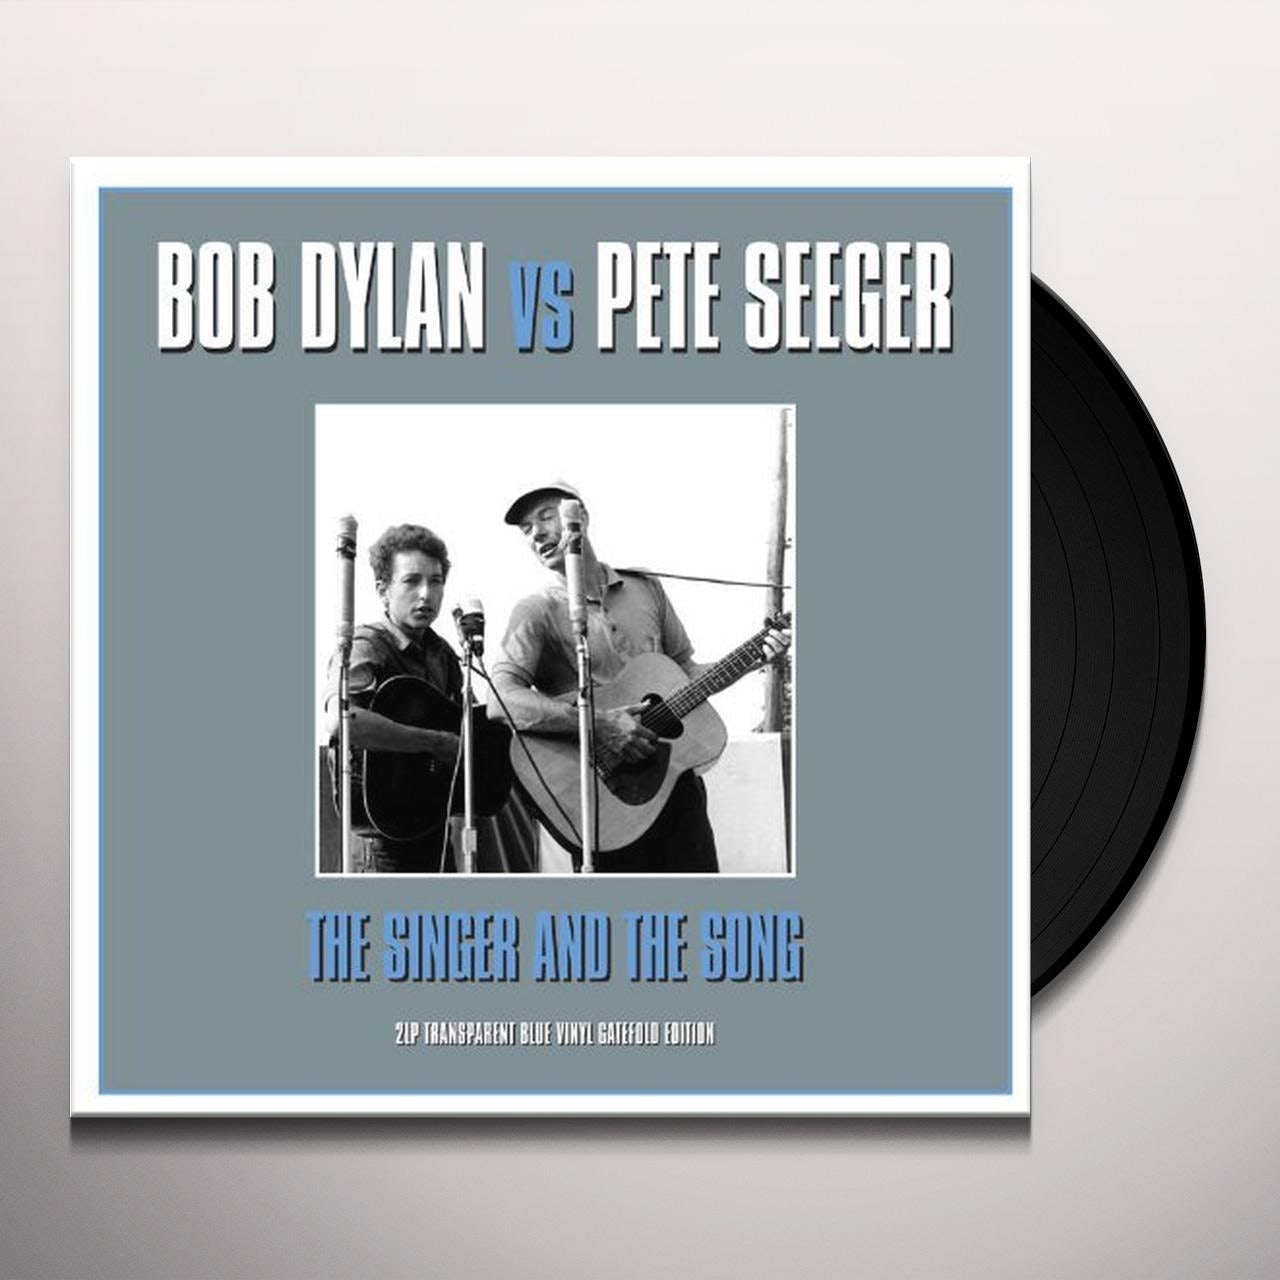 Bob Dylan & Pete Seeger - The Singer & The Song - 2LP